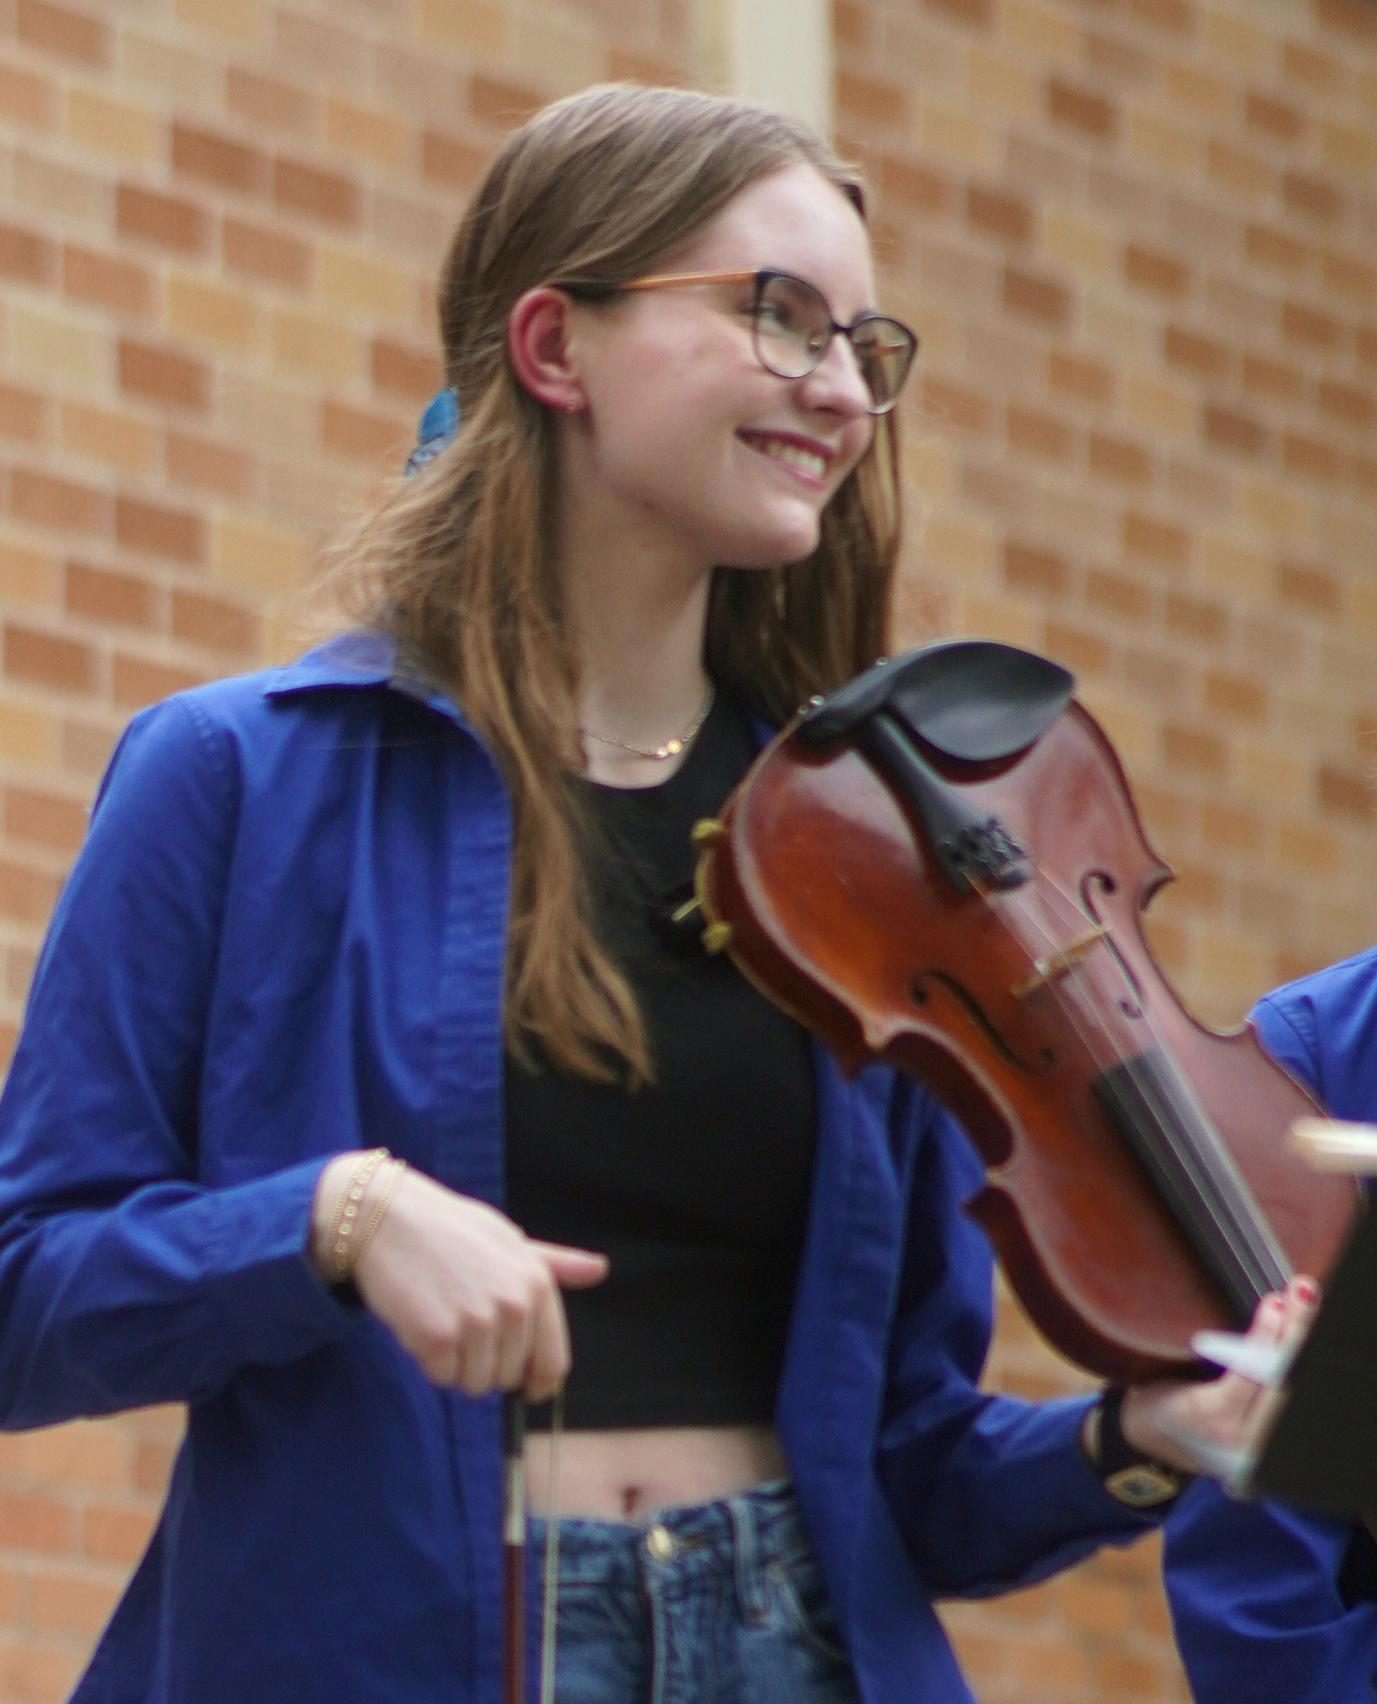 Senior Ingrid Smith, the founder and leader of the Fiddle Club, took center stage with her club colleagues during a lunch time performance in the fine arts courtyard on Fine Arts Week Wednesday on April 24.